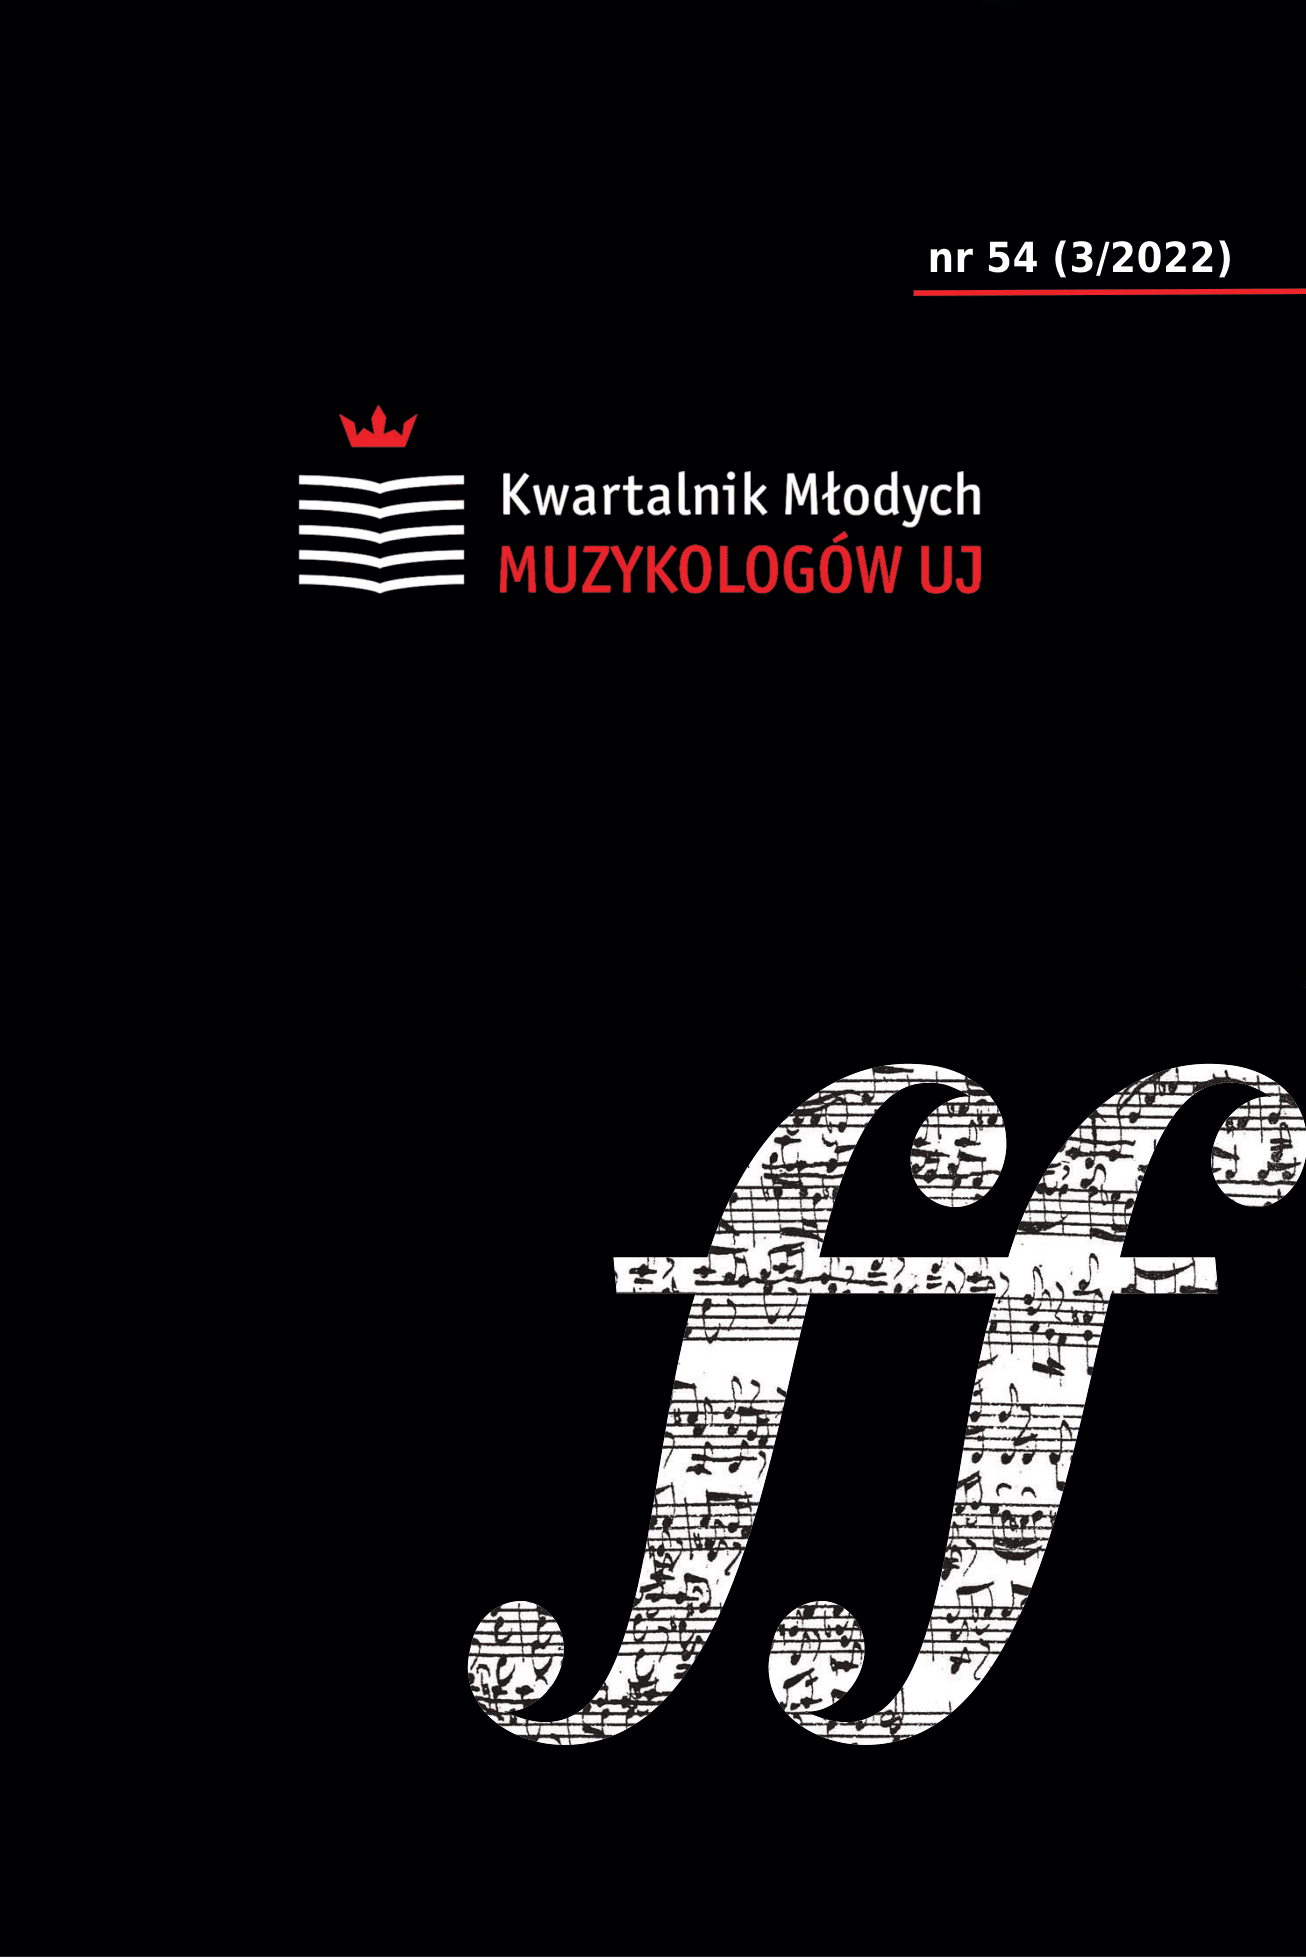 The Categories of Time and Musical Form in Paweł Mykietyn’s Concerto No. 2 for Cello and Symphony Orchestra Cover Image